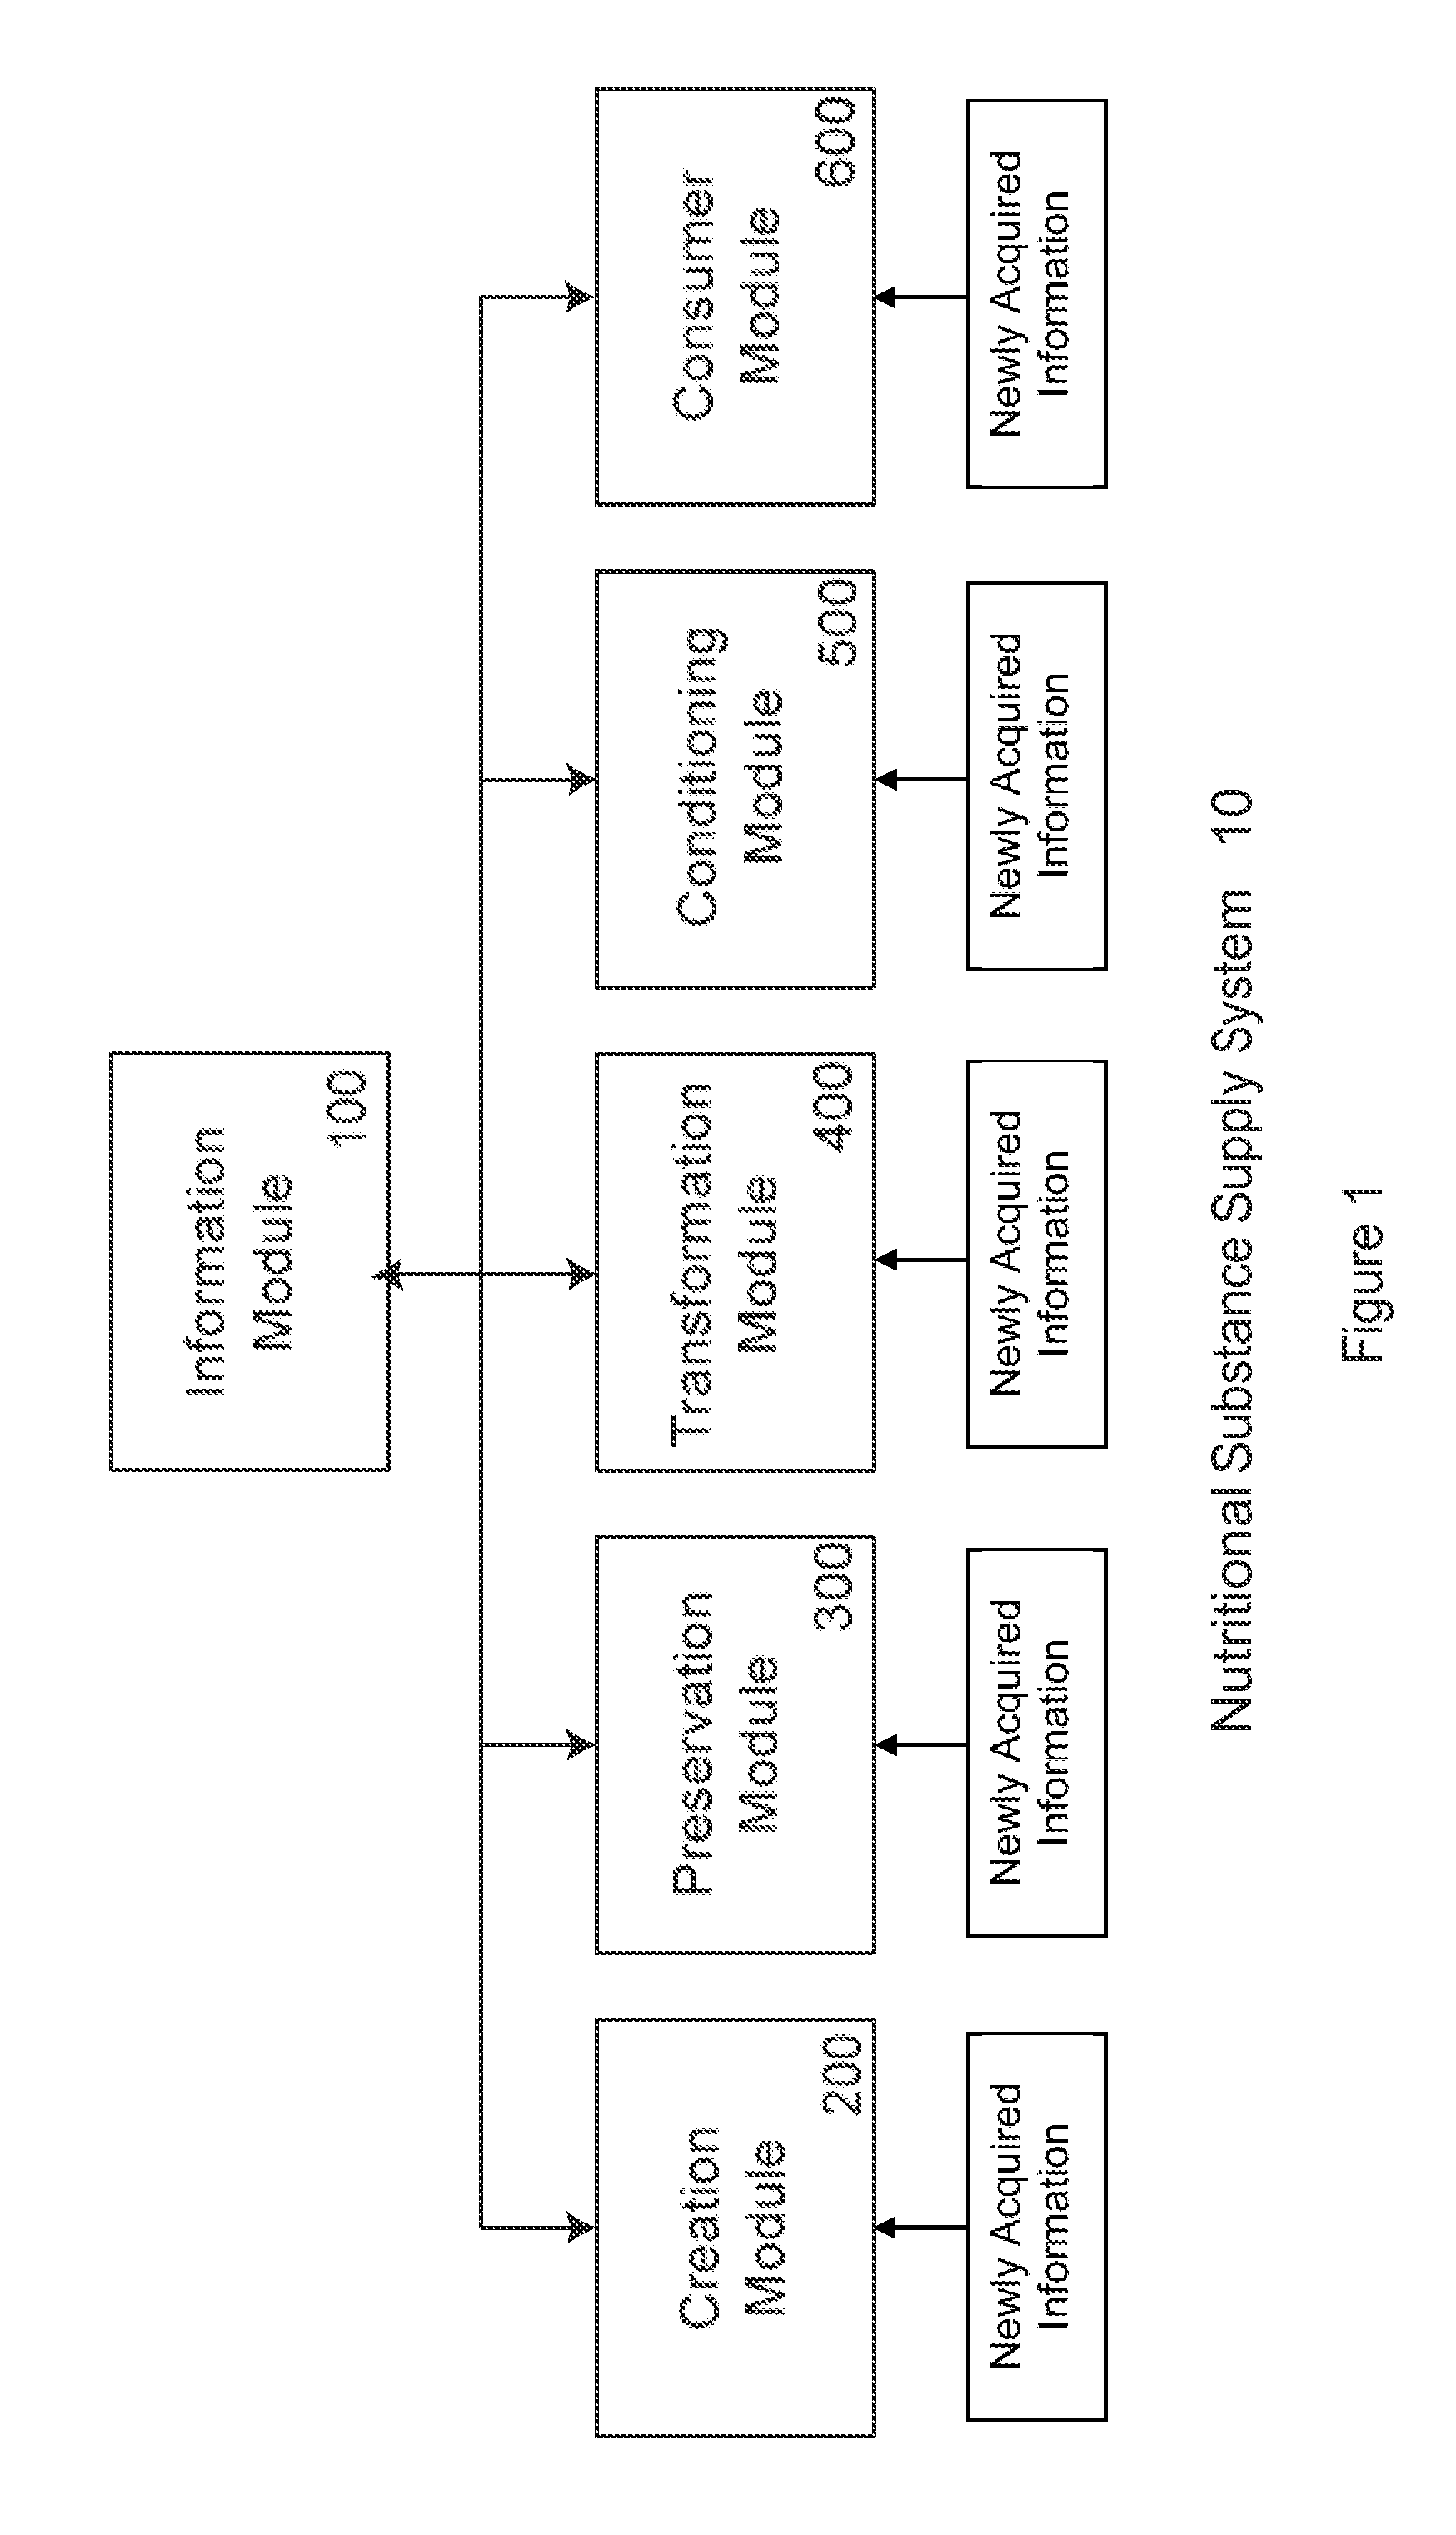 Appliances with Weight Sensors for Nutritional Substances